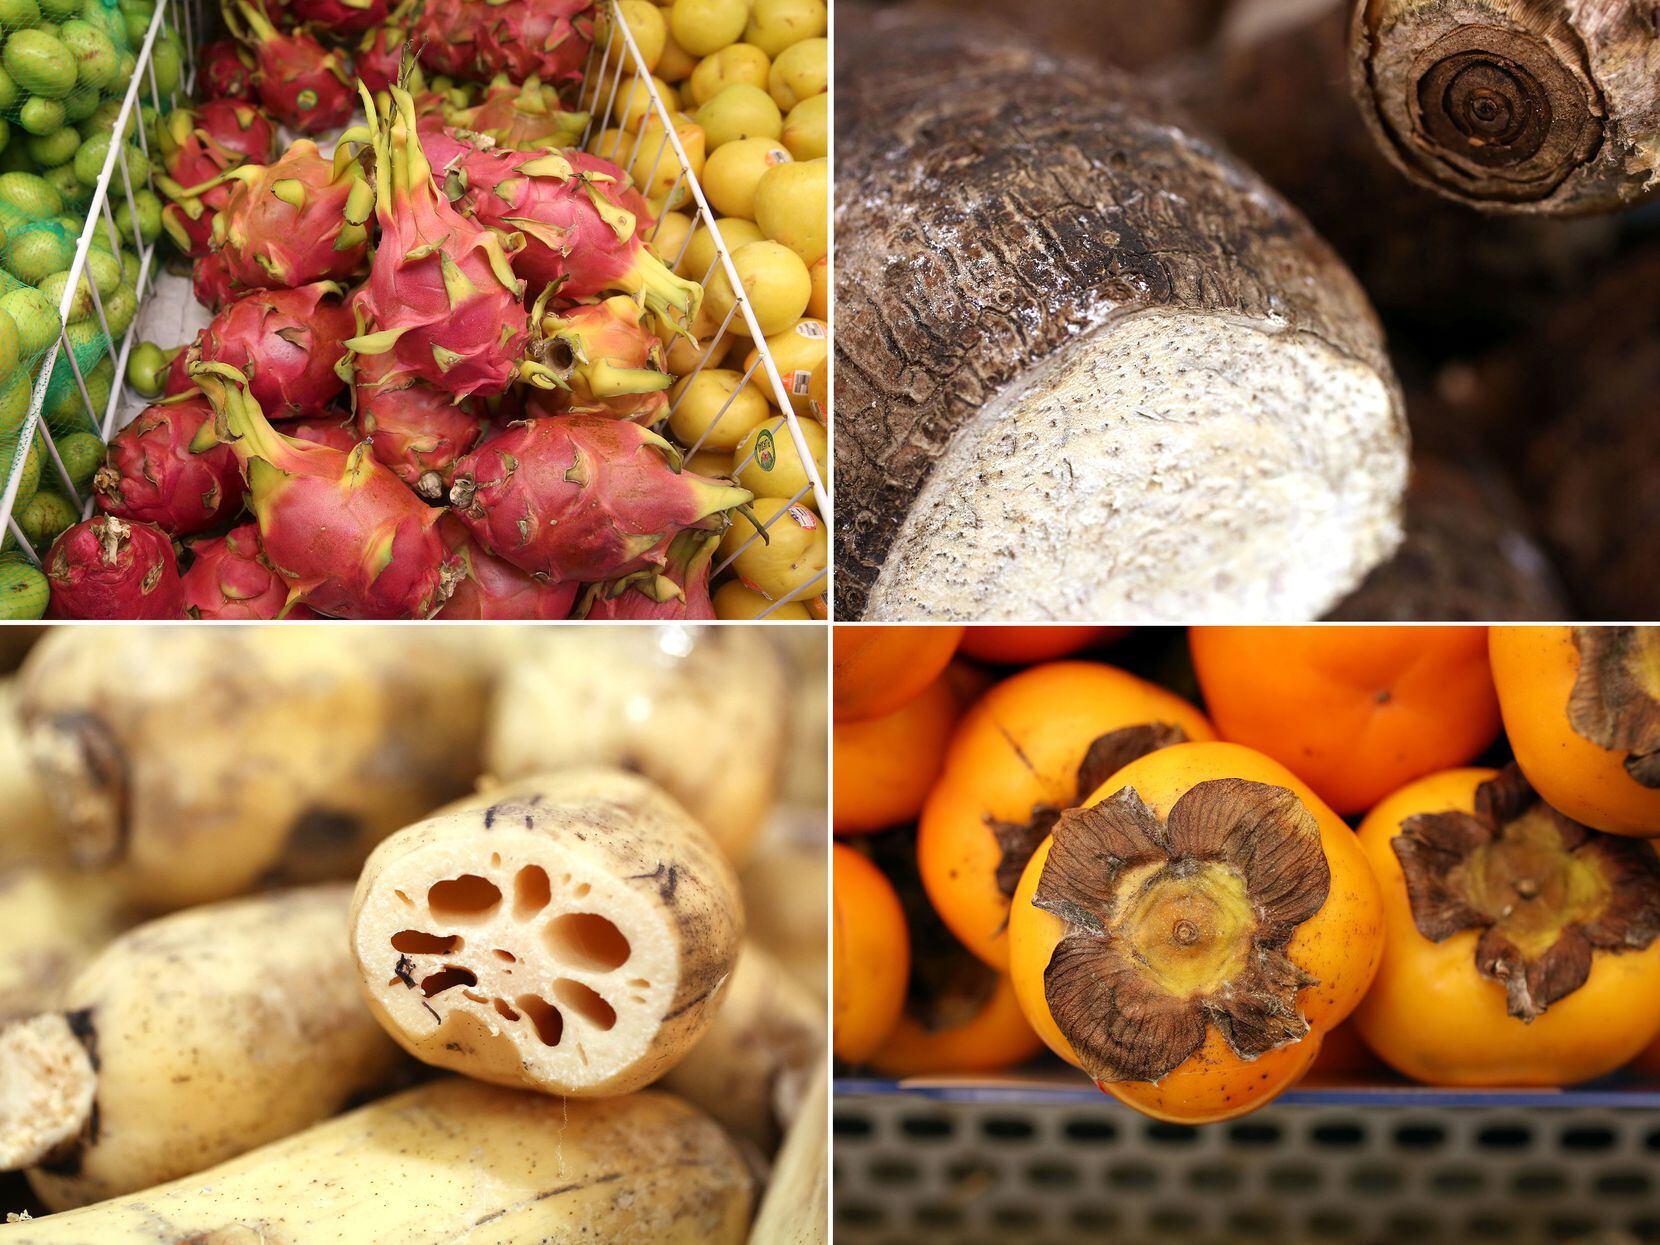 Clockwise from top left: dragon fruit; taro root, persimmons and lotus root